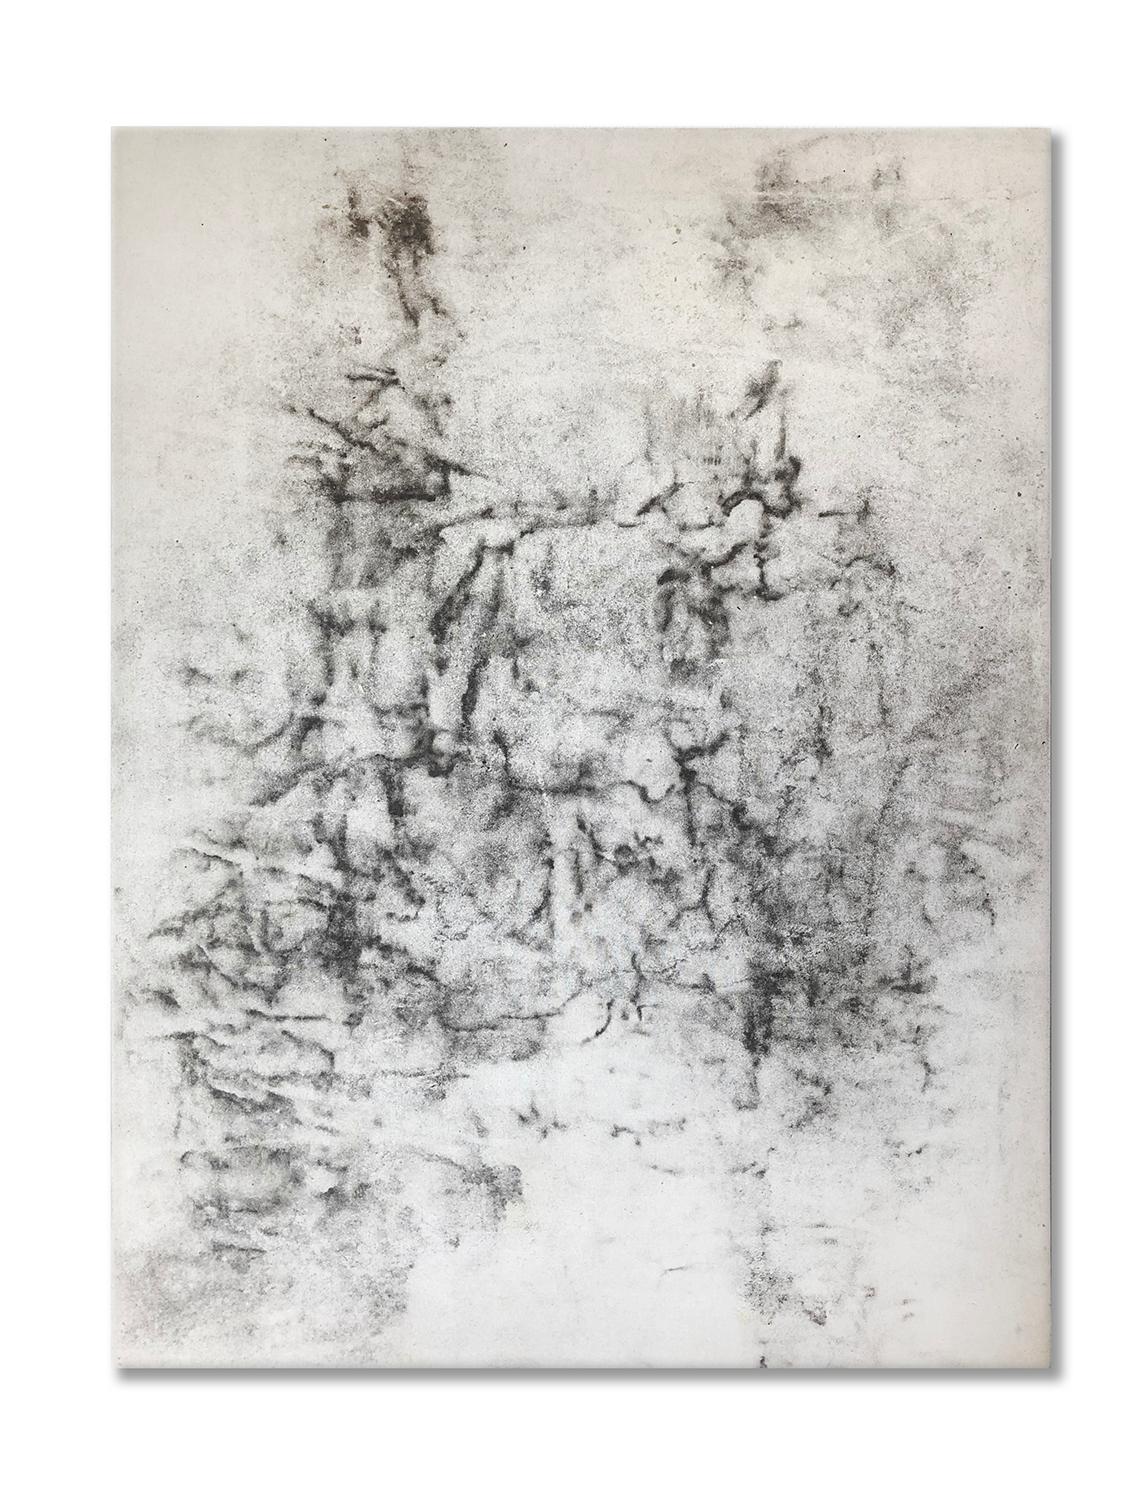 Ash Ceniza #1, (drawing, black and white, abstract, expressionist, ashes, pape - Mixed Media Art by Kurtis Brand